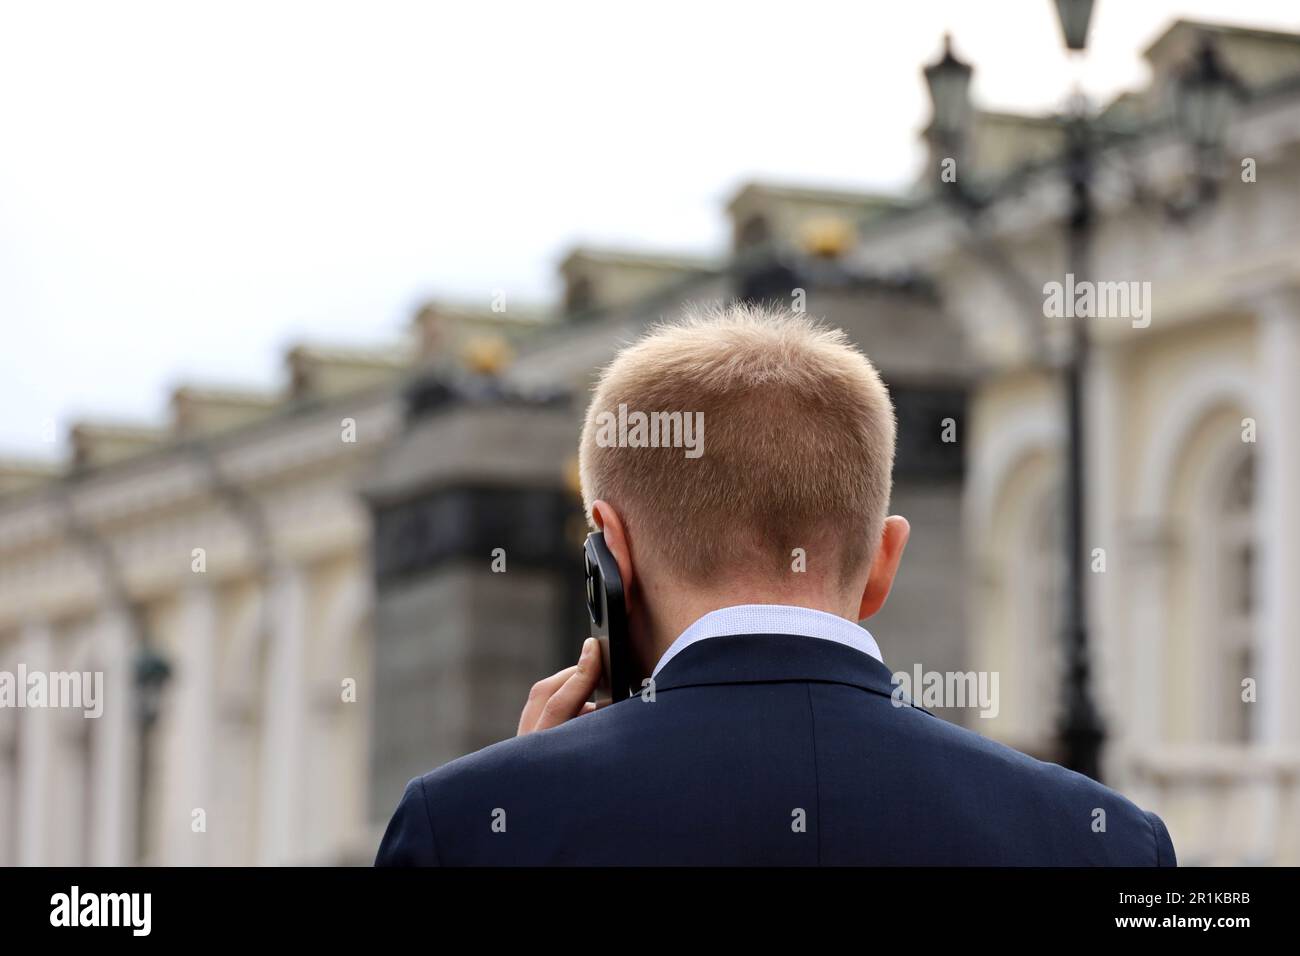 Short haired man in a business suit talking on mobile phone on a city street. Concept of cellular communication Stock Photo